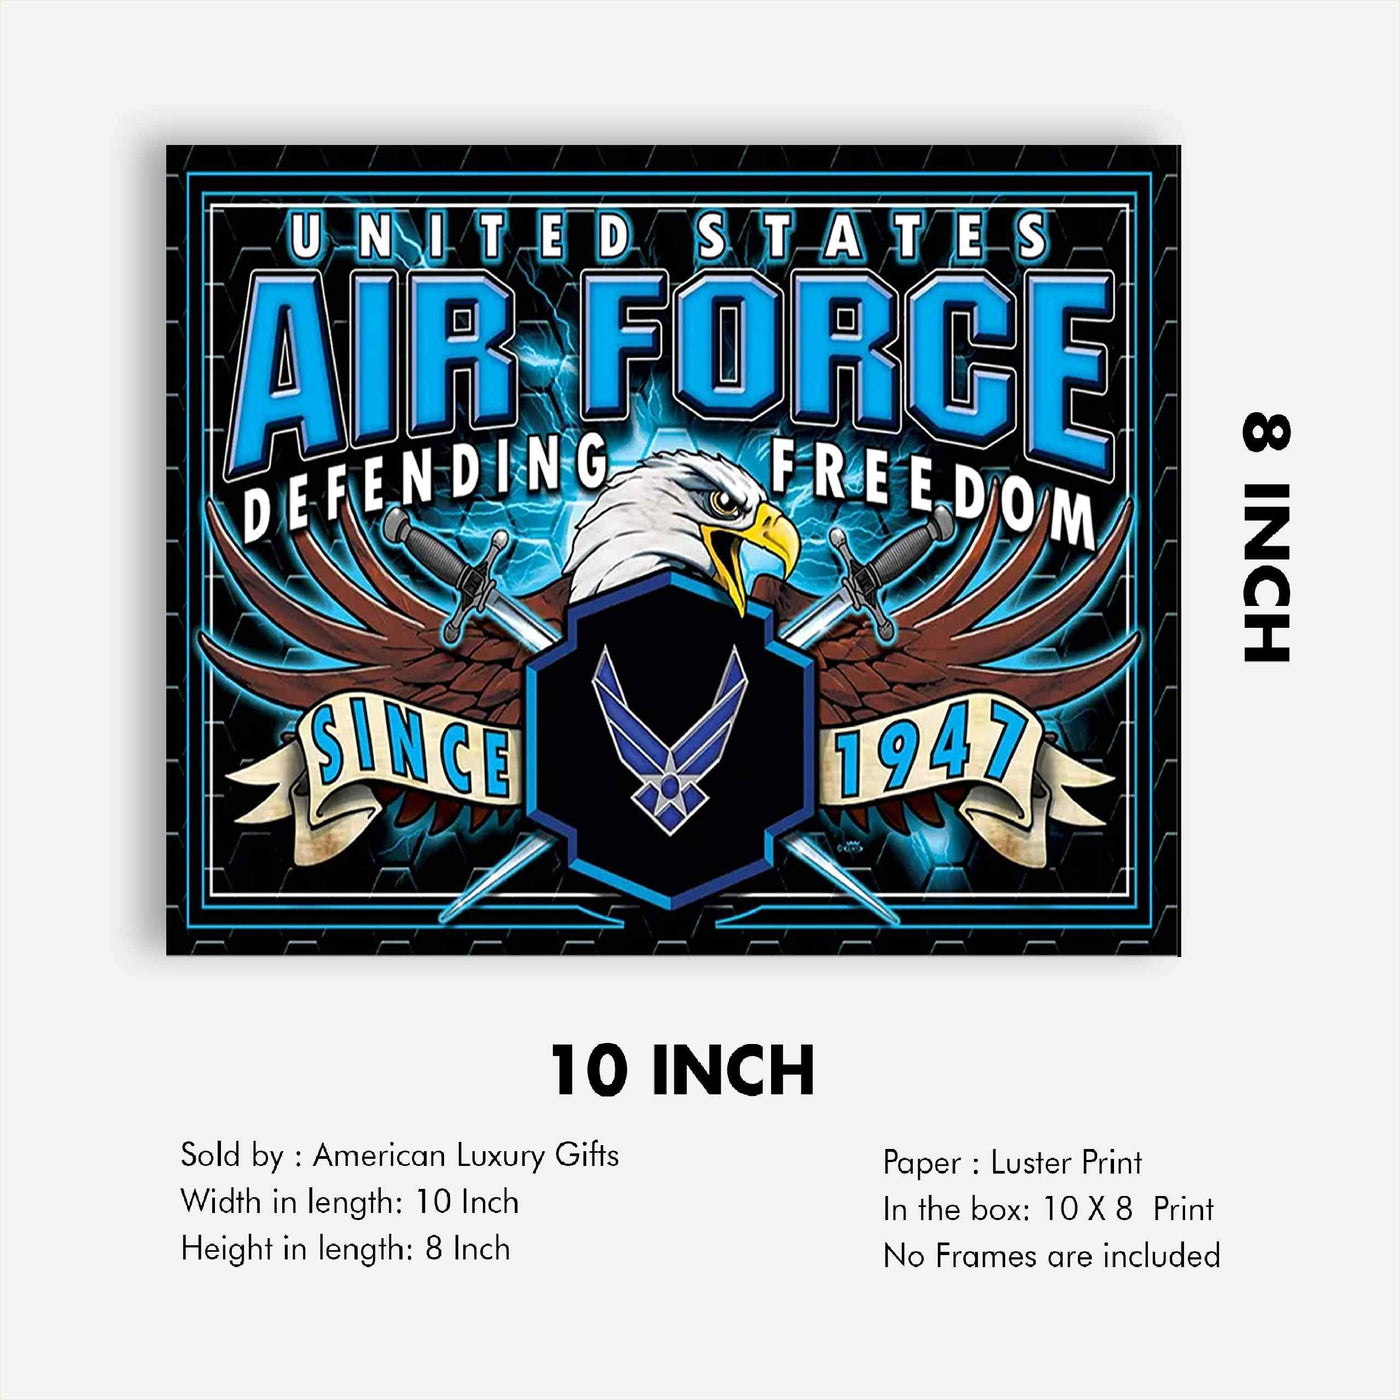 U.S. Air Force War Eagle Poster Print- 10 x 8"- Airmen Wall Art Prints-Ready To Frame."Defending Freedom Since 1947". Home-Office-Military Decor. Great Gift to Display Airman's Military Pride!